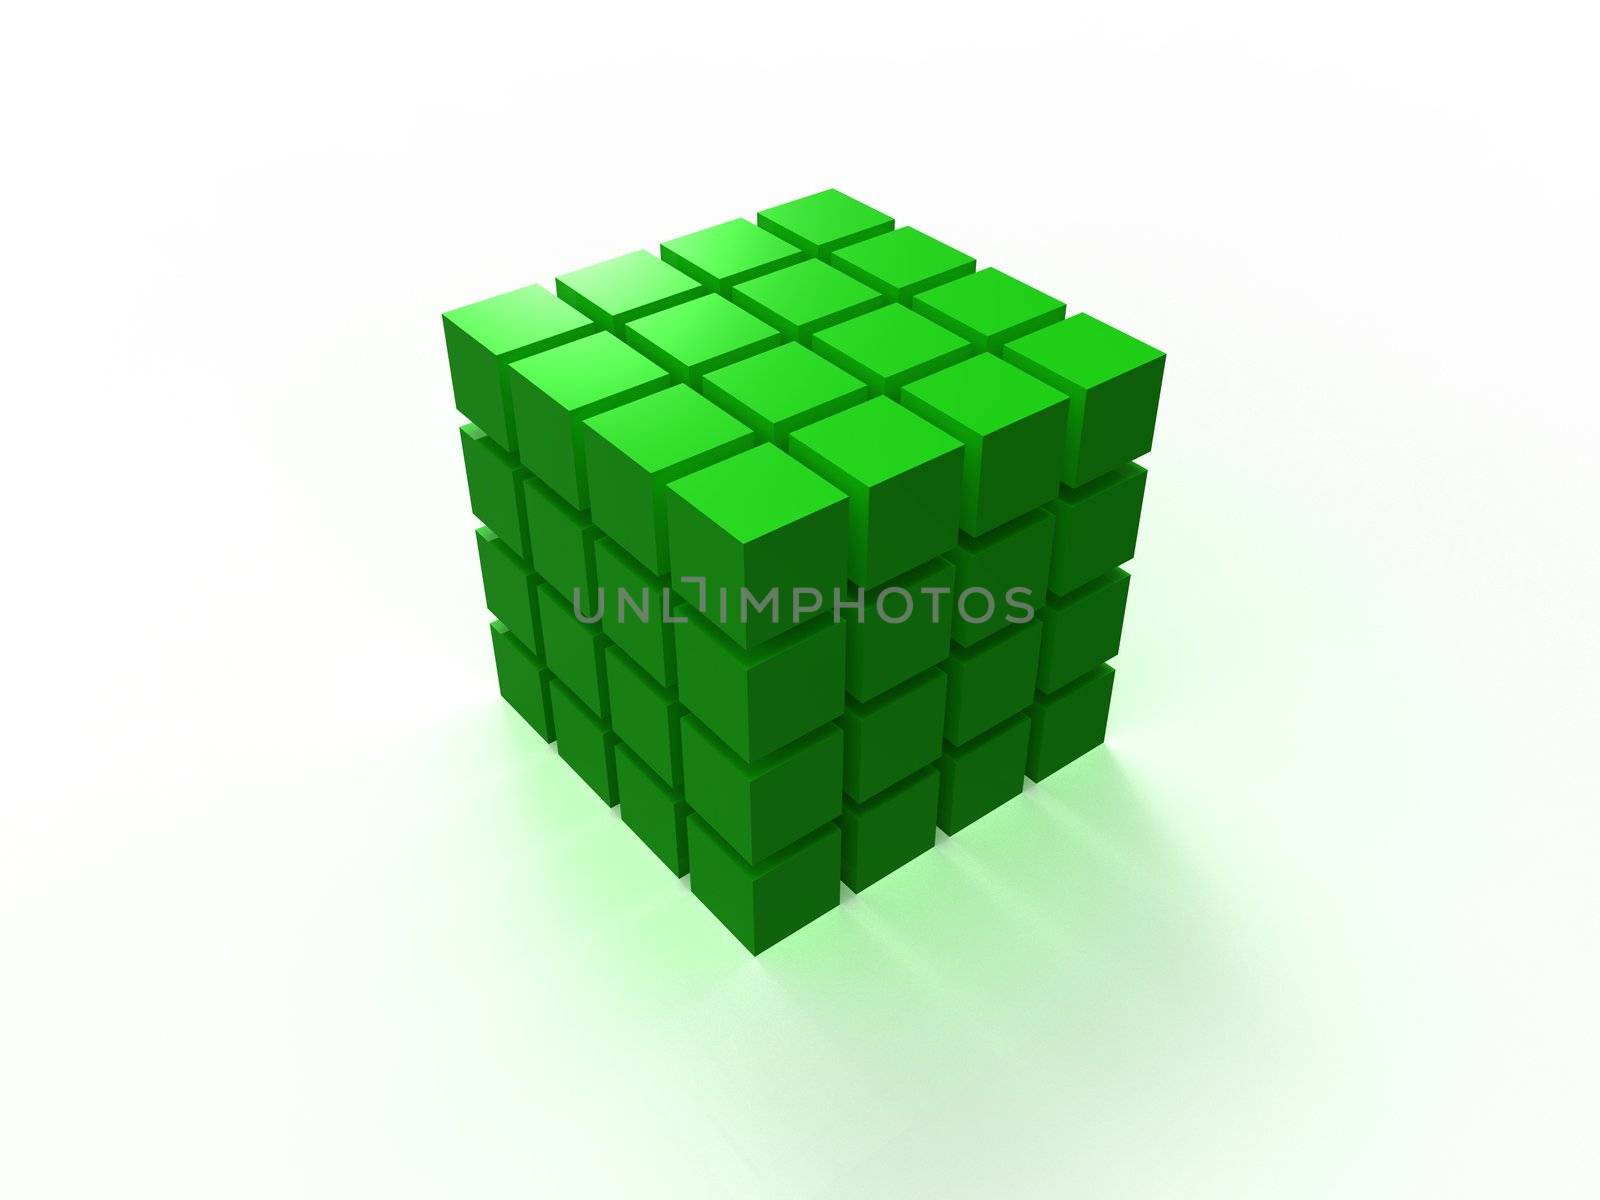 4x4 green ordered cube assembling from blocks isolated on white background by vermicule